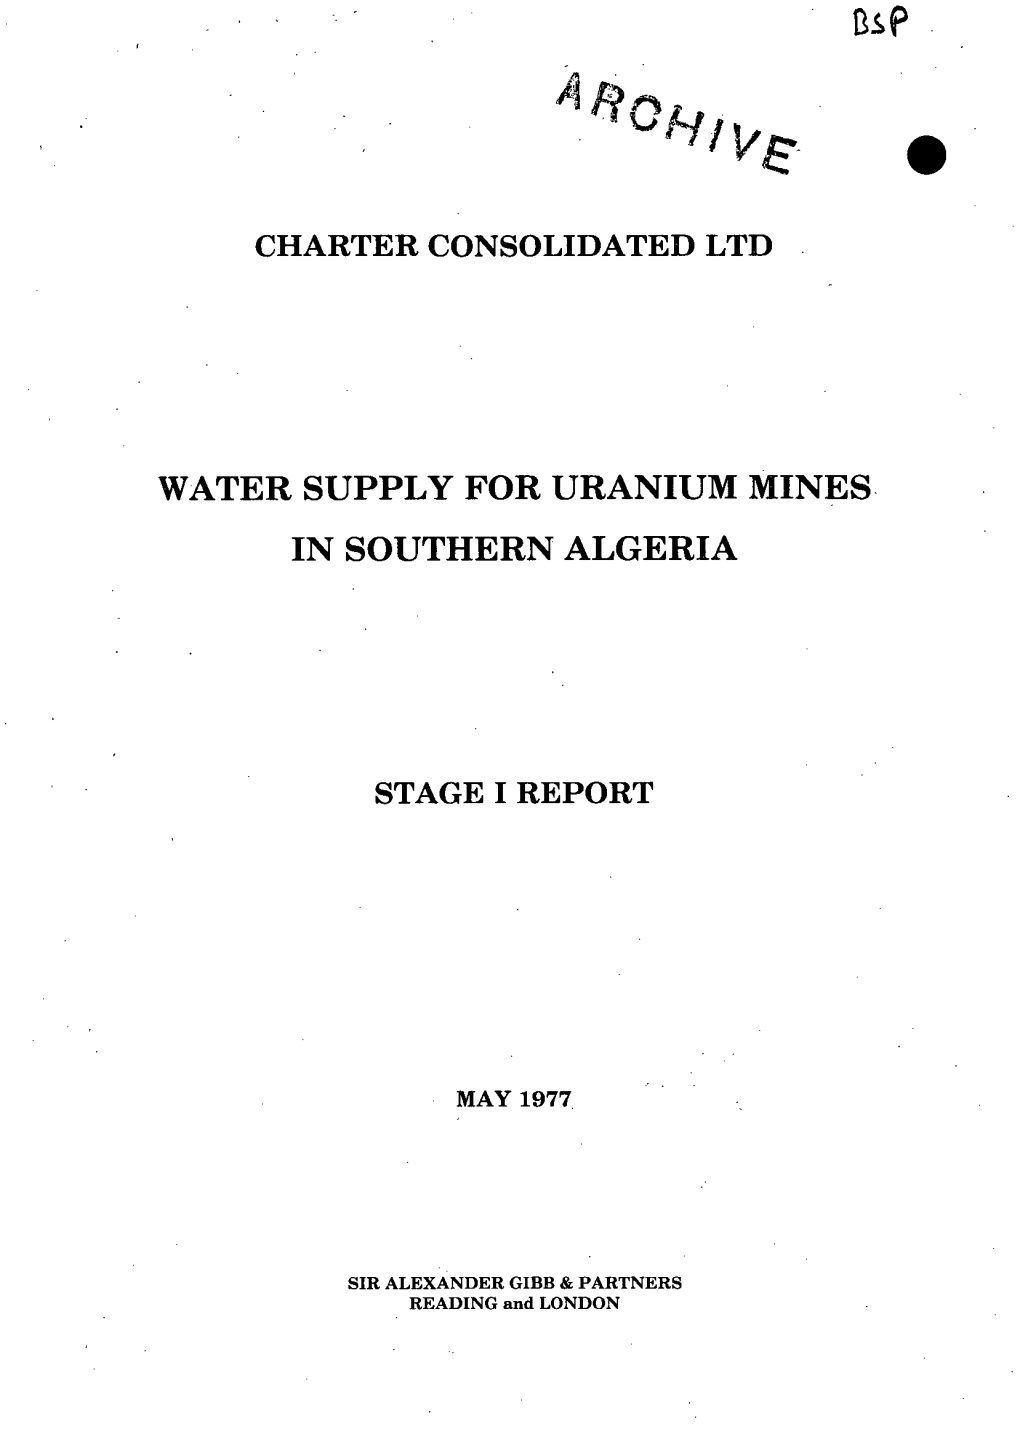 Water Supply for Uranium Mines in Southern Algeria